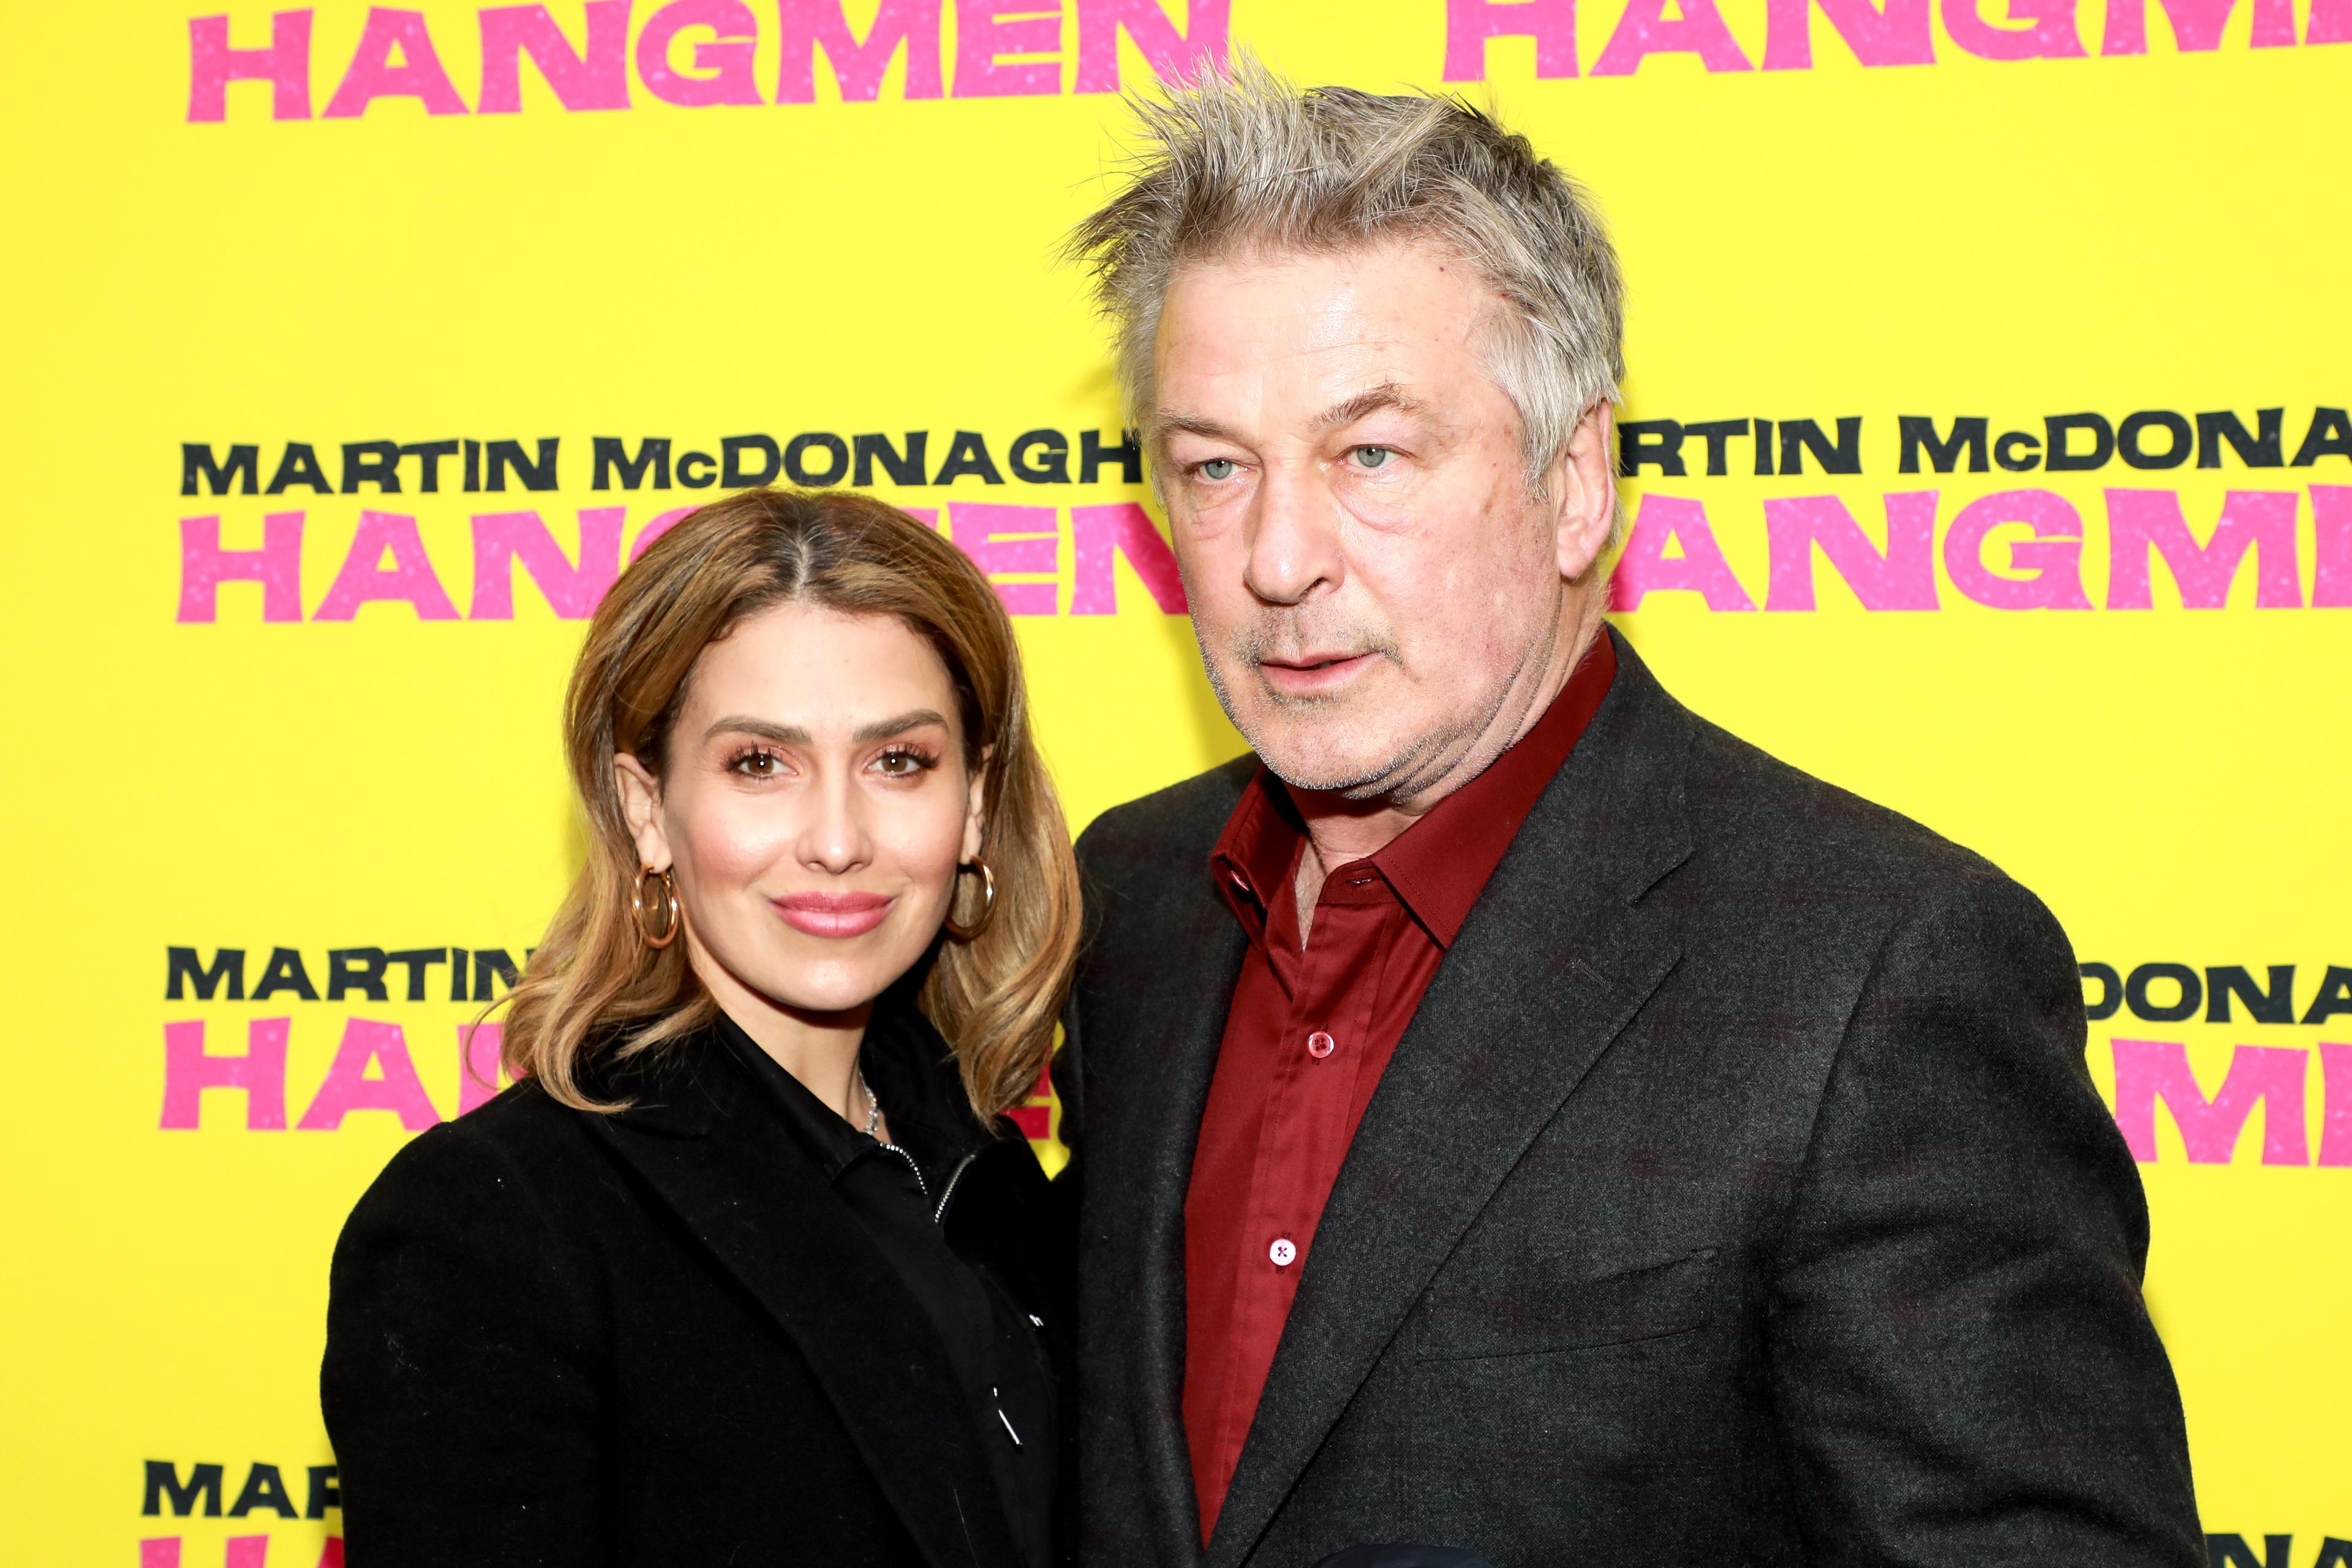 Alec and Hilaria Baldwin to Star in TLC Reality Show With Their 7 Children